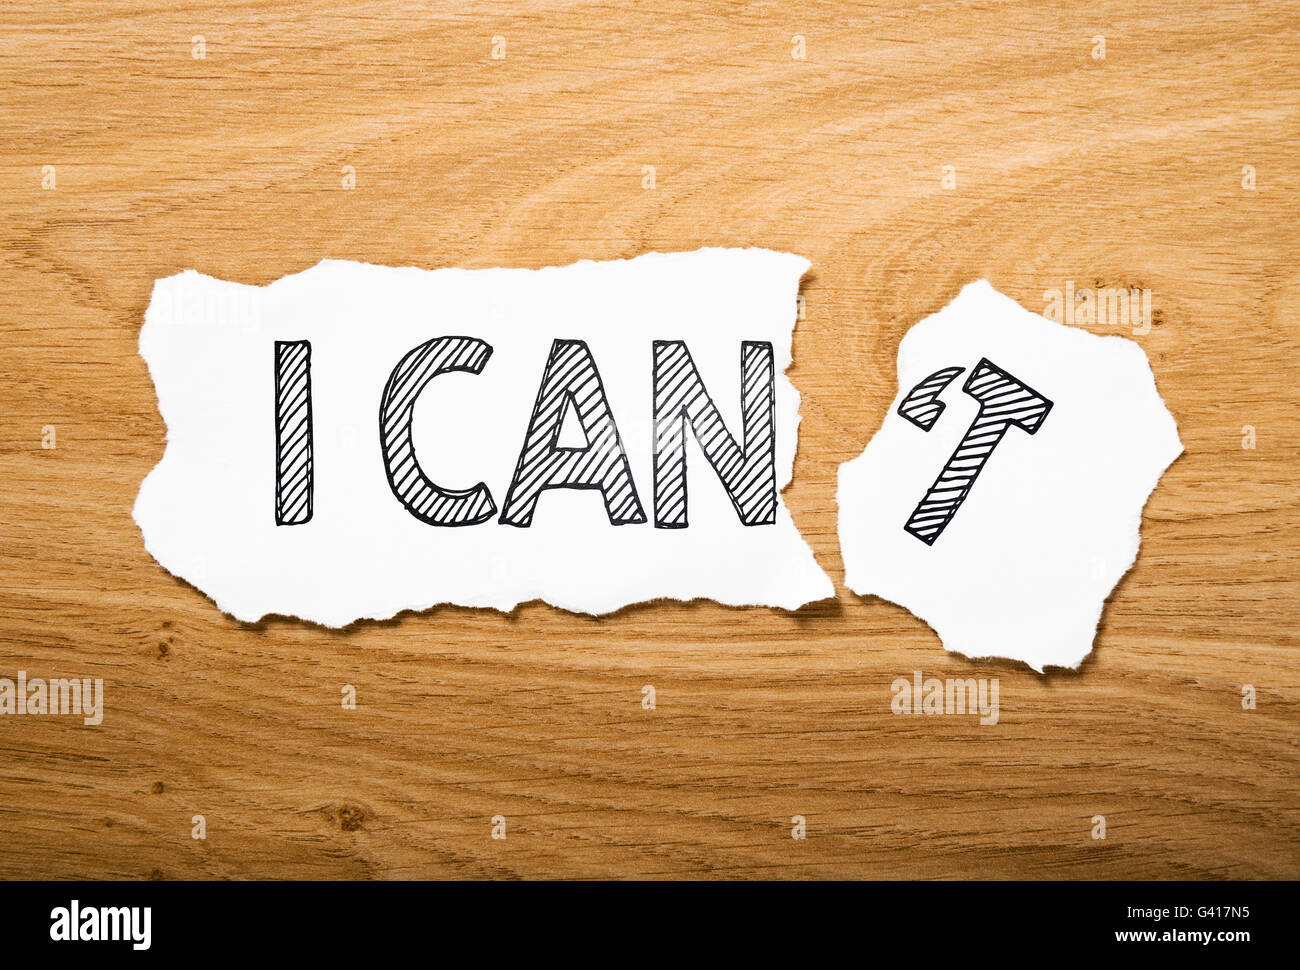 I can or I can't: two pieces torn paper with contrast messages Stock Photo